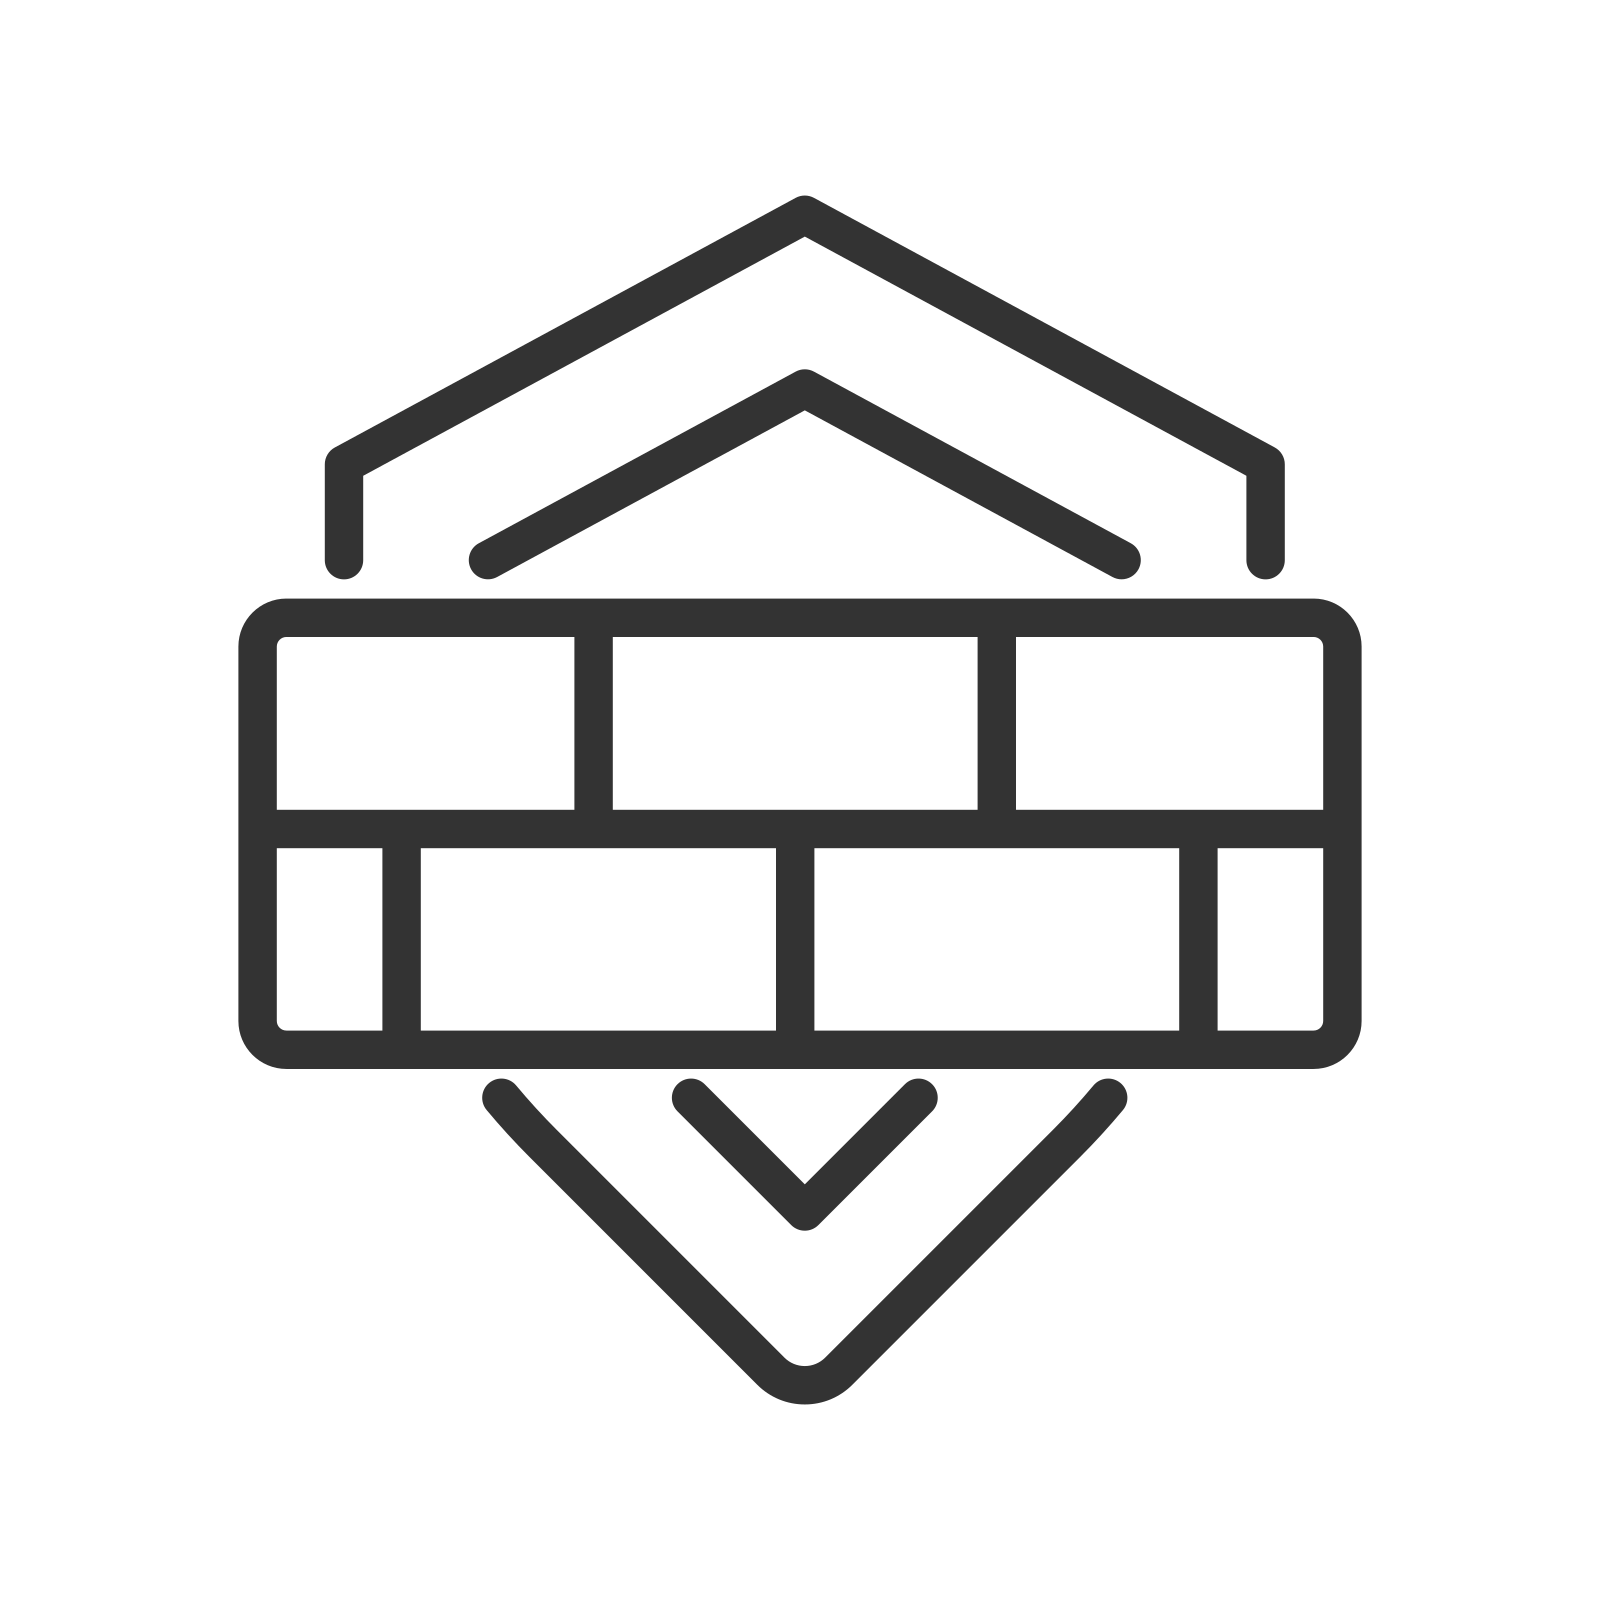 external Firewall-online-security-stroke-papa-vector icon